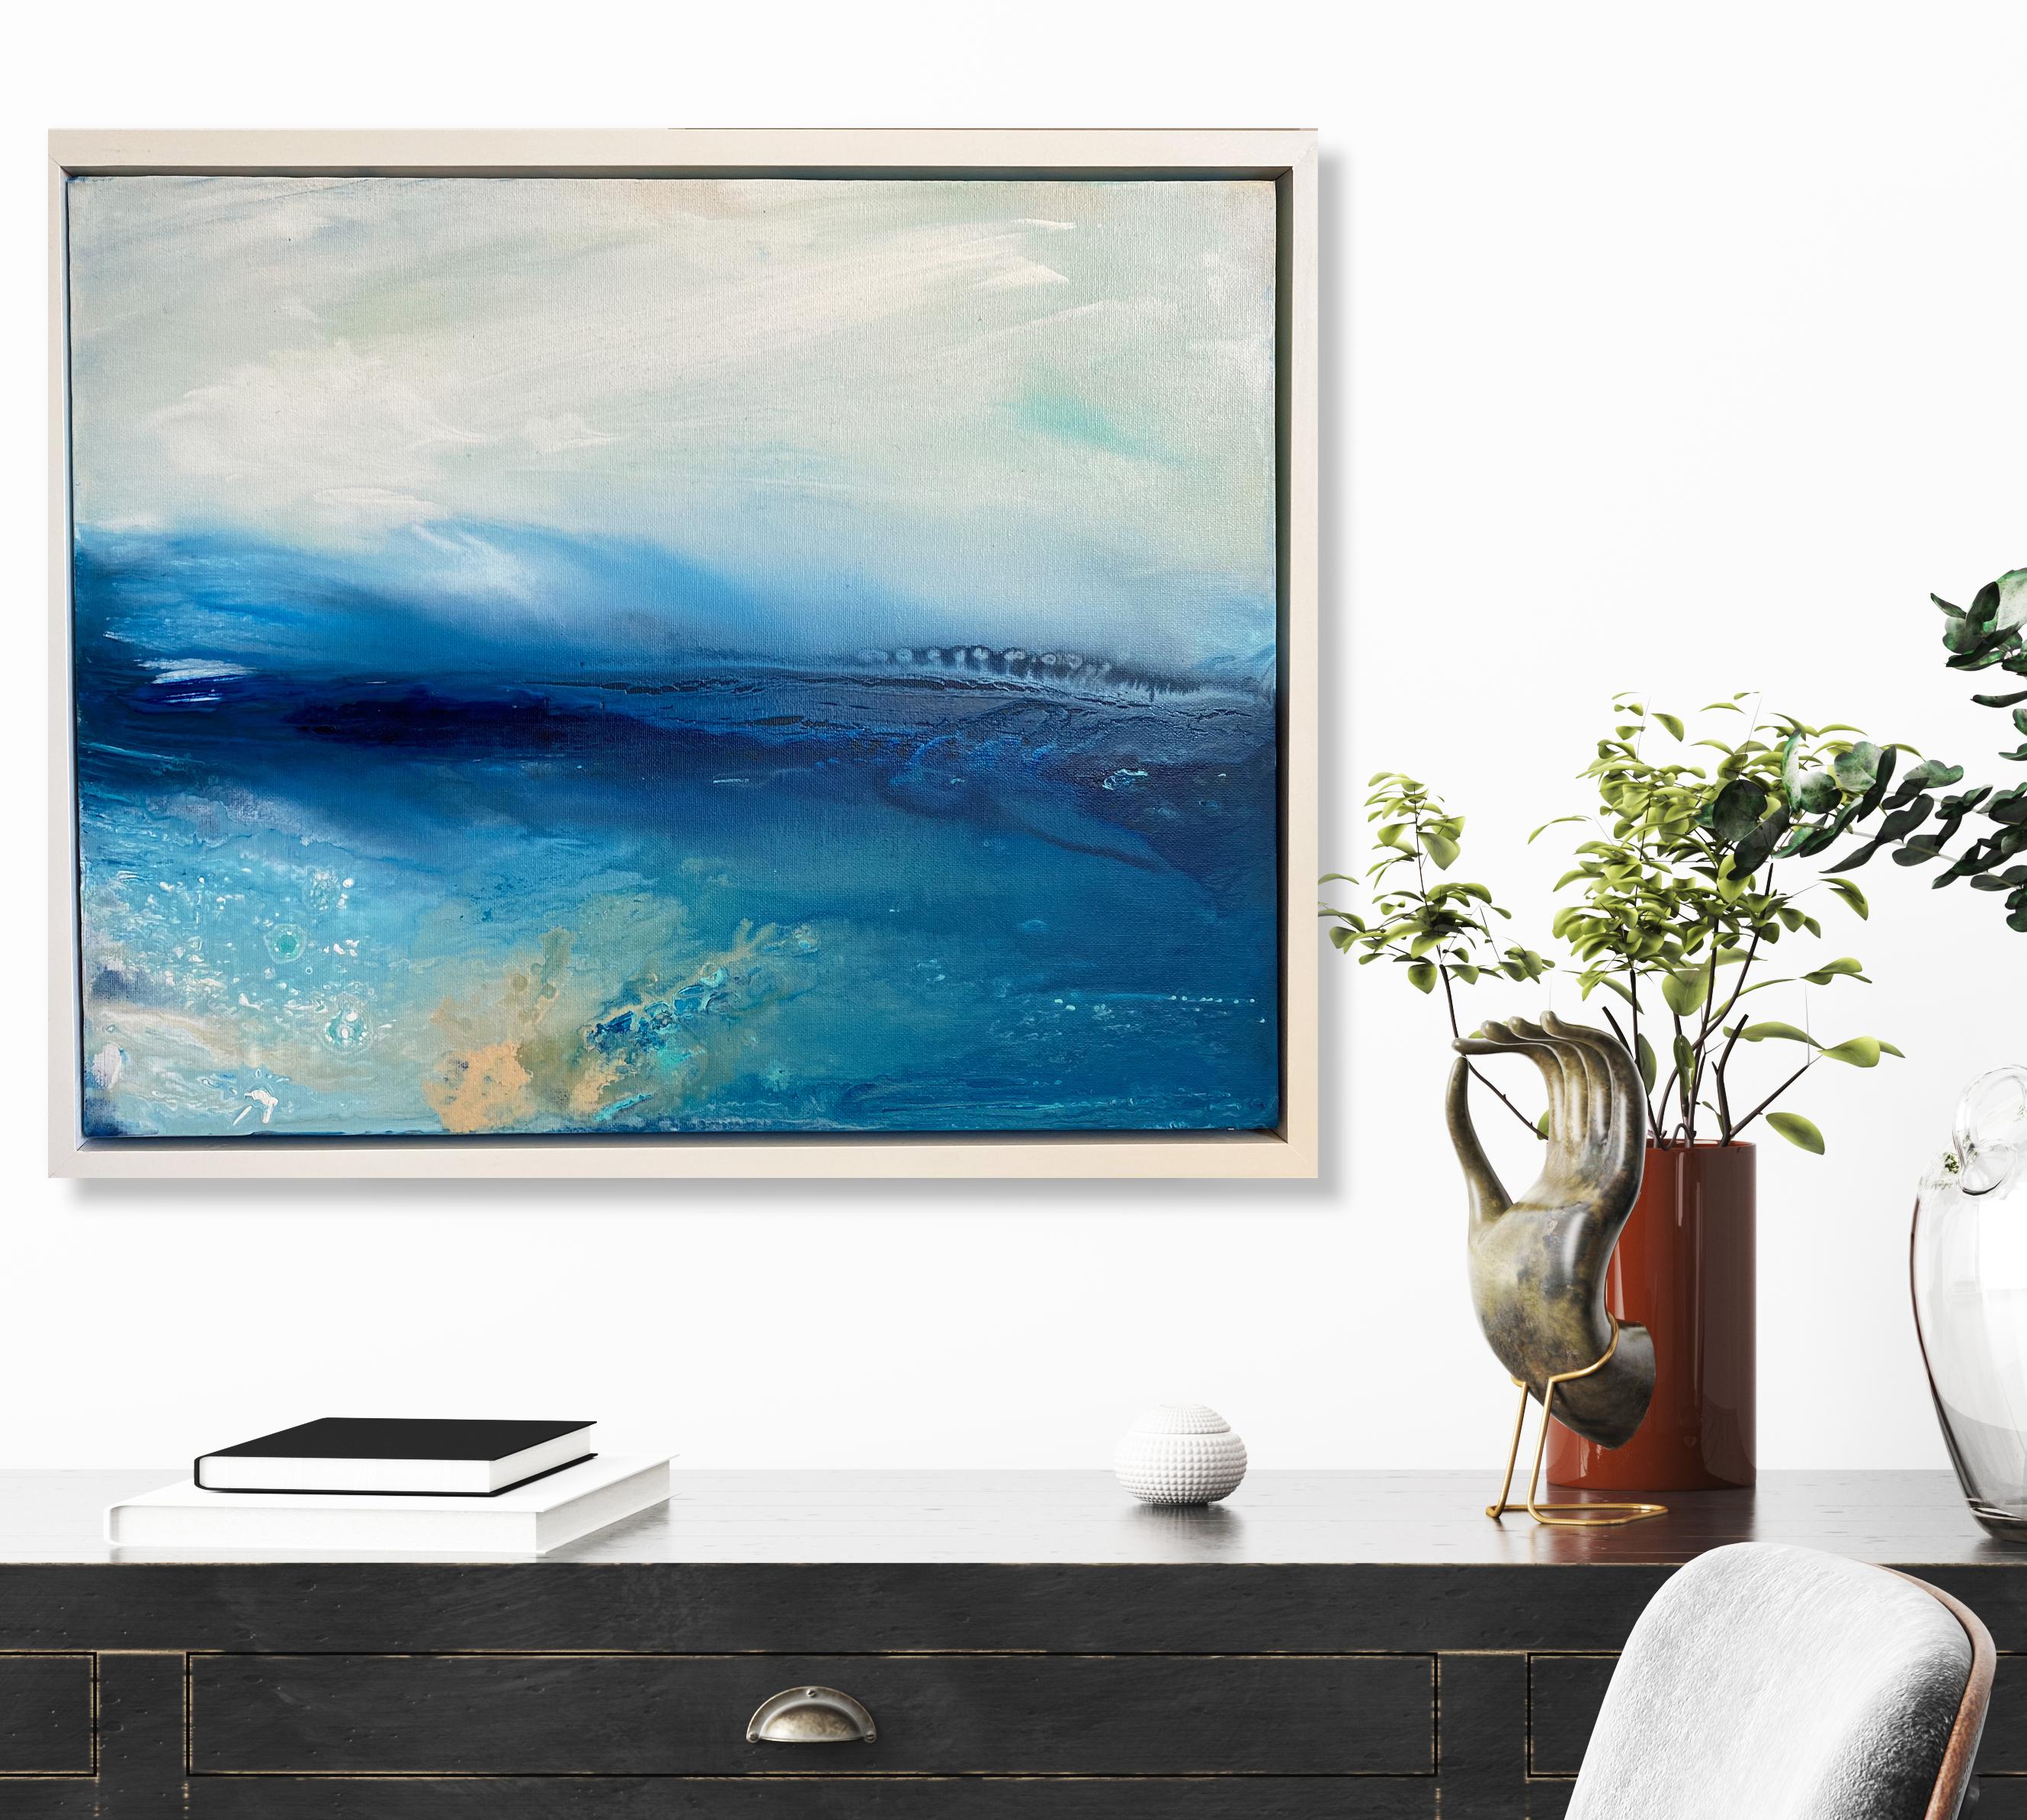 I always find inspiration in endless waves and a calming effect from the beach and coastline where I grew up on the Gold Coast of Australia. After many year I have returned and enjoy early morning walks on the beach, the sunrising form the east over